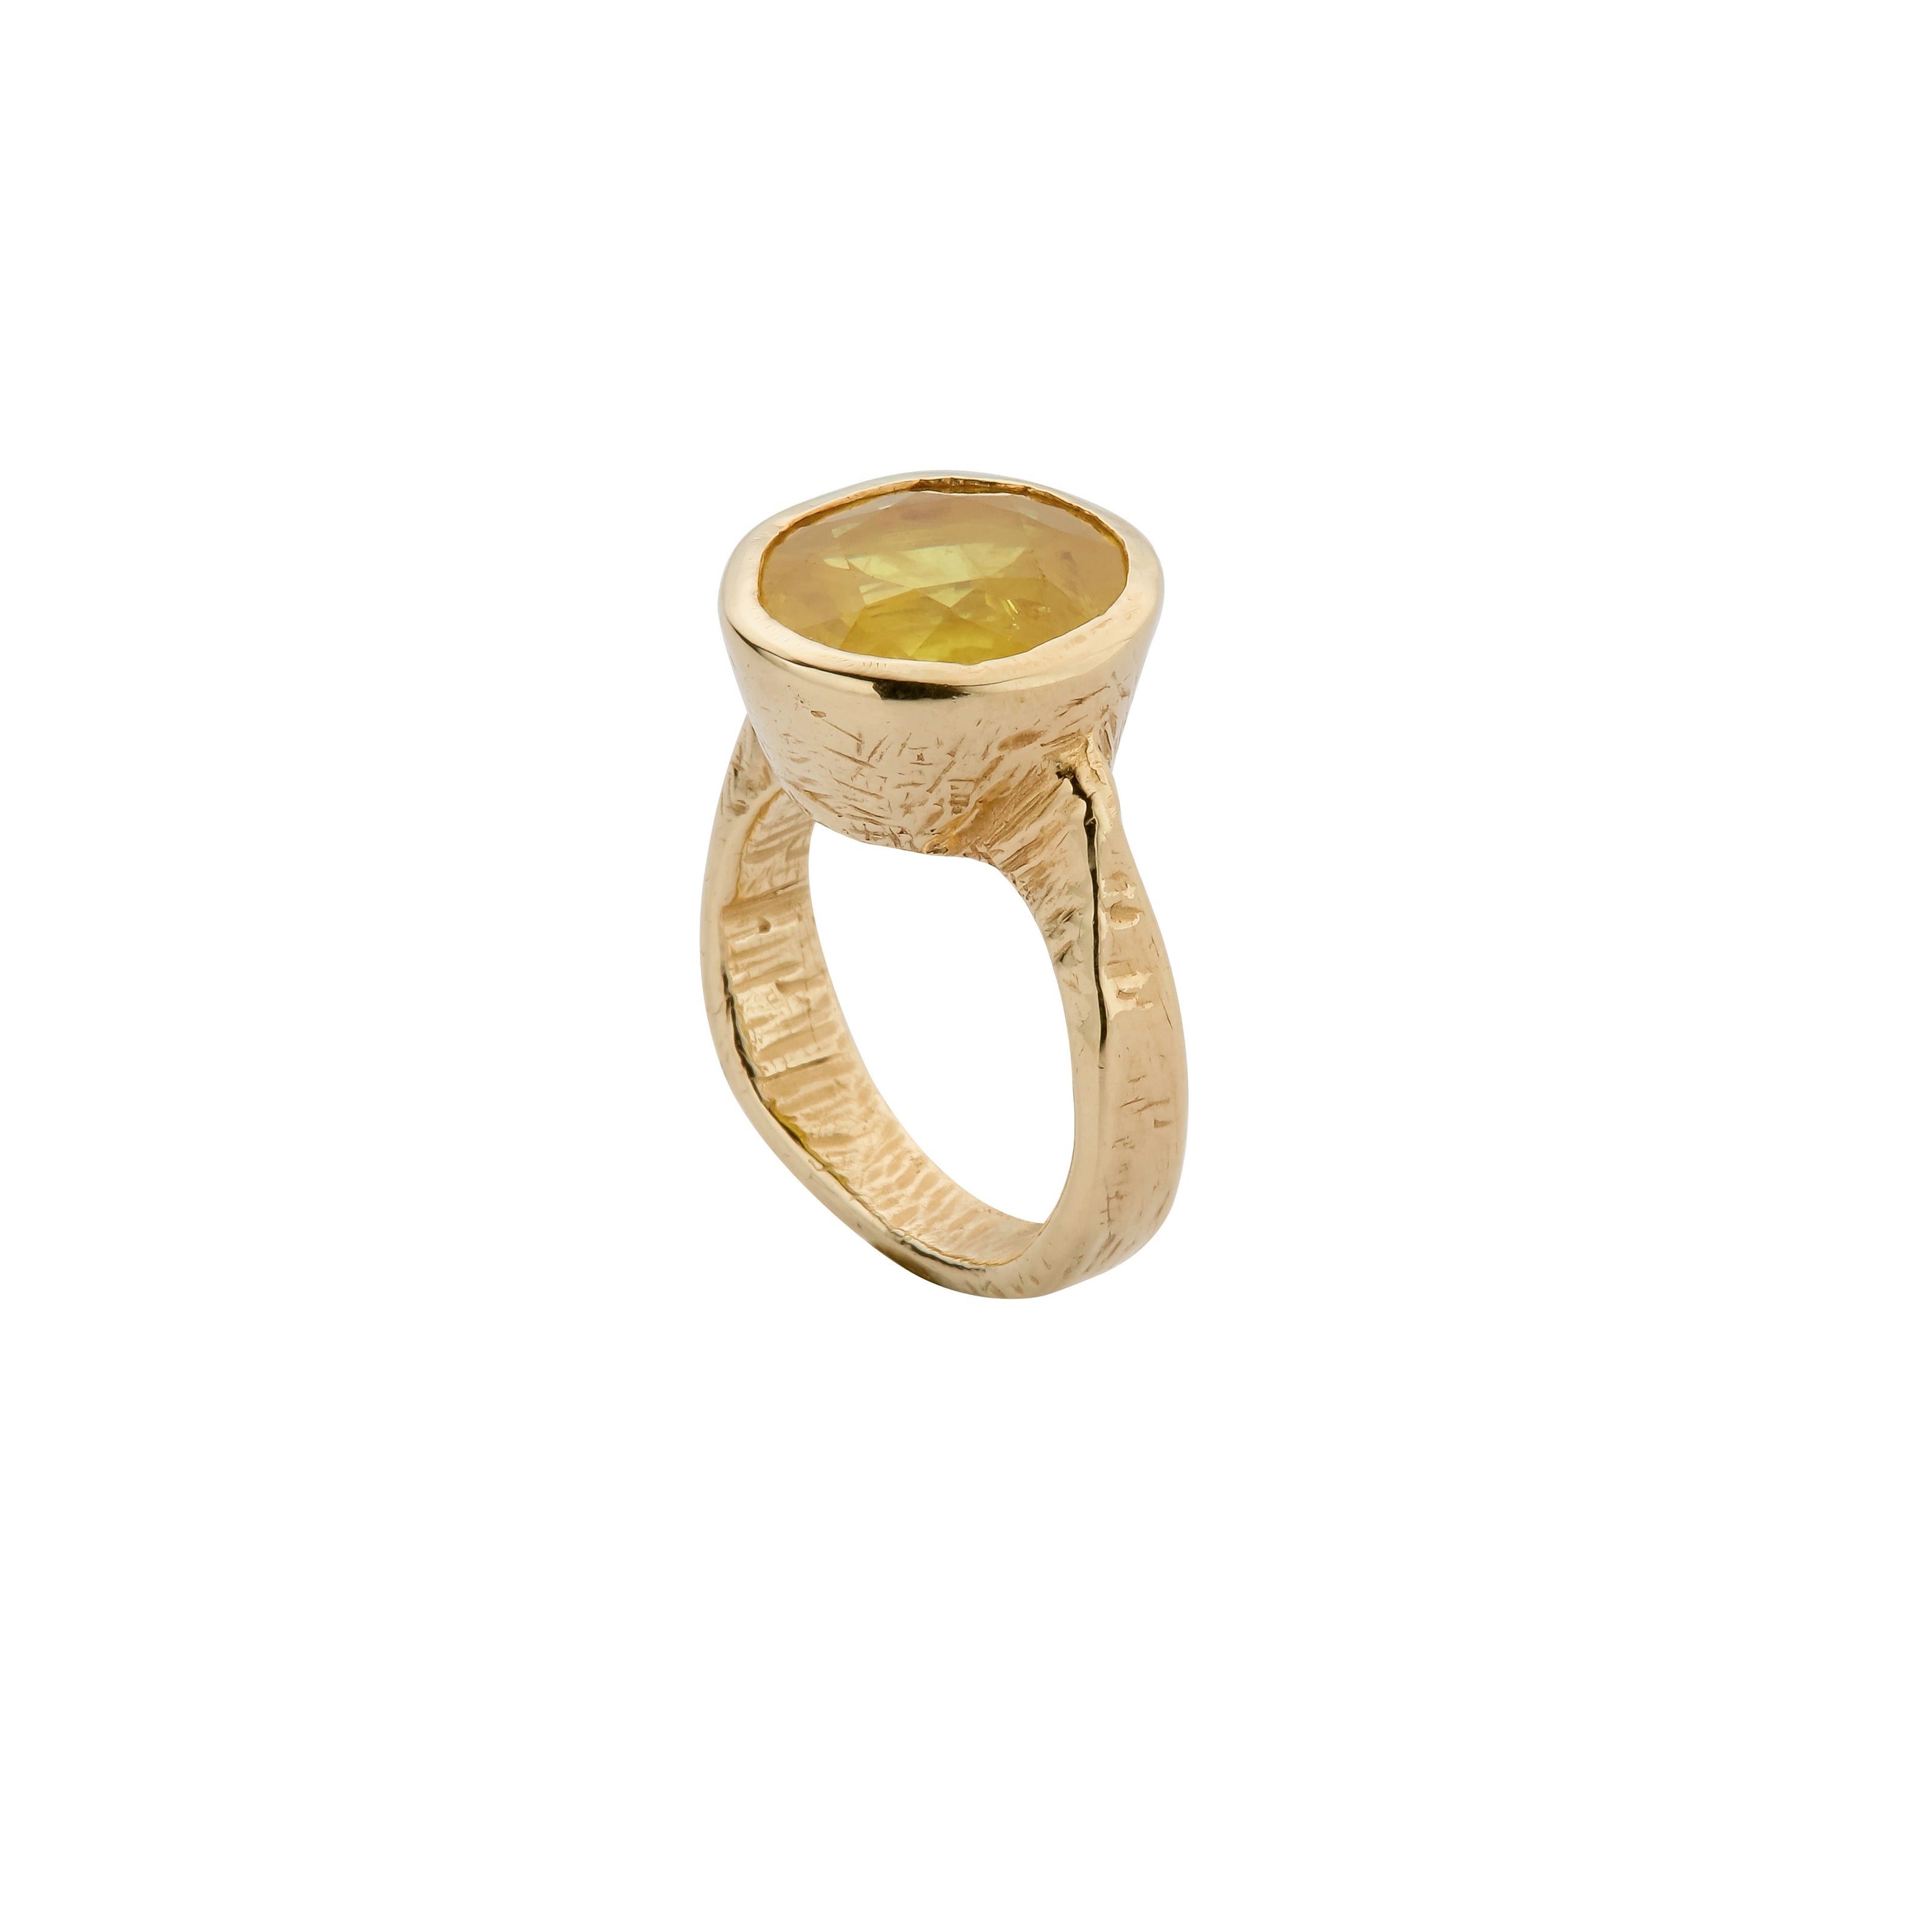 SOL Gold Yellow Sapphire Ring